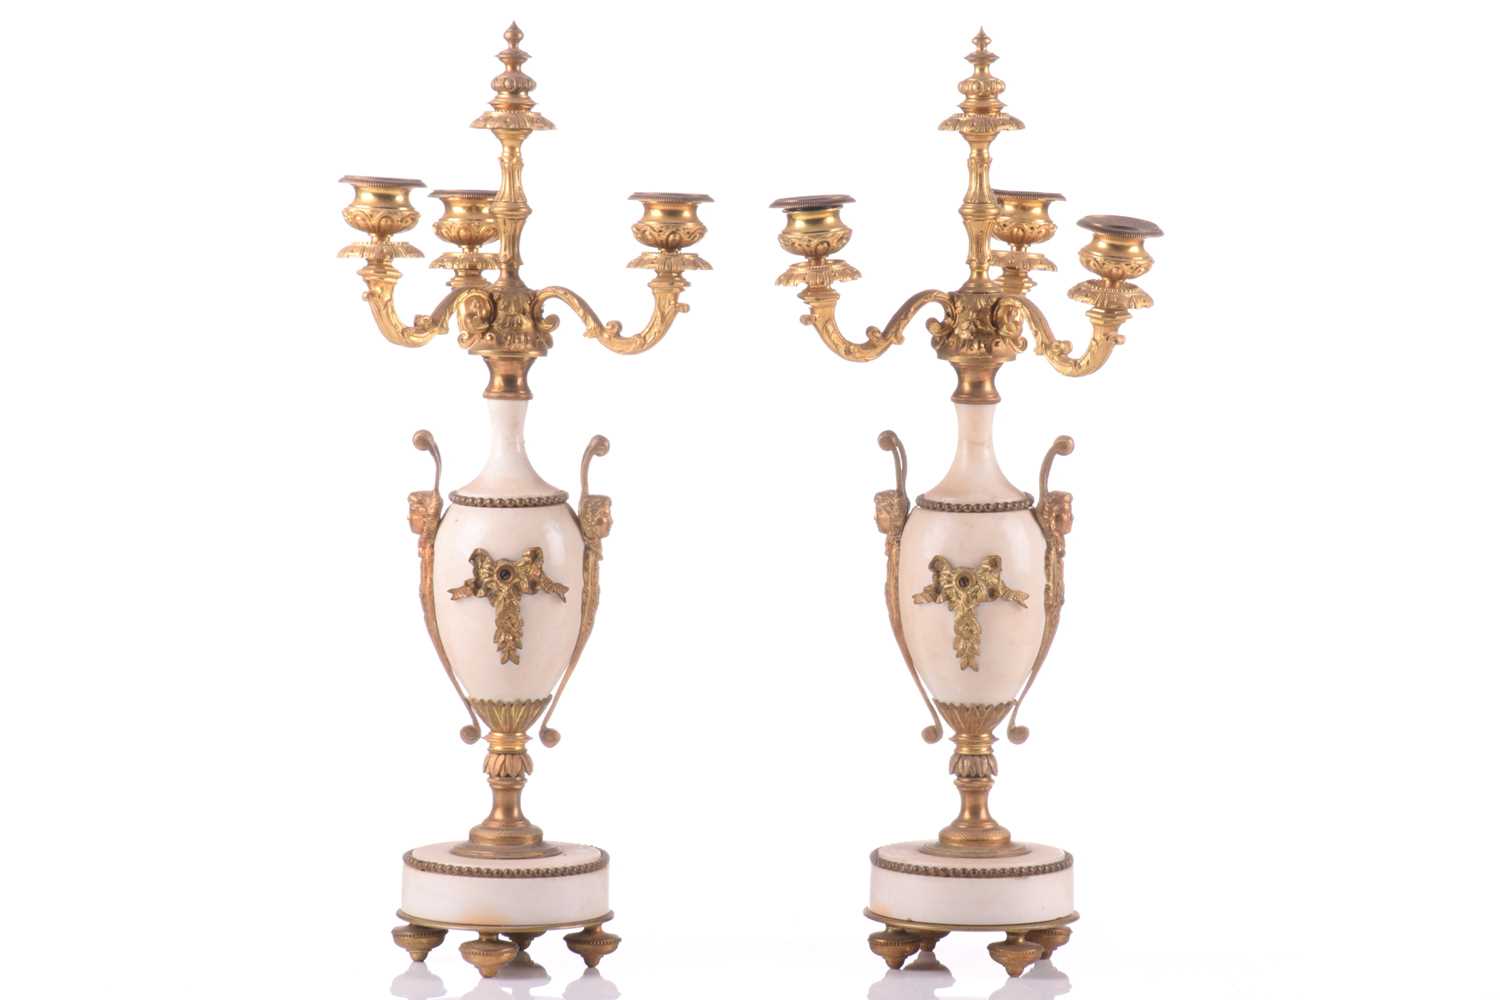 A pair of ormolu and white marble three-sconce candelabras, late 19th century, each with three